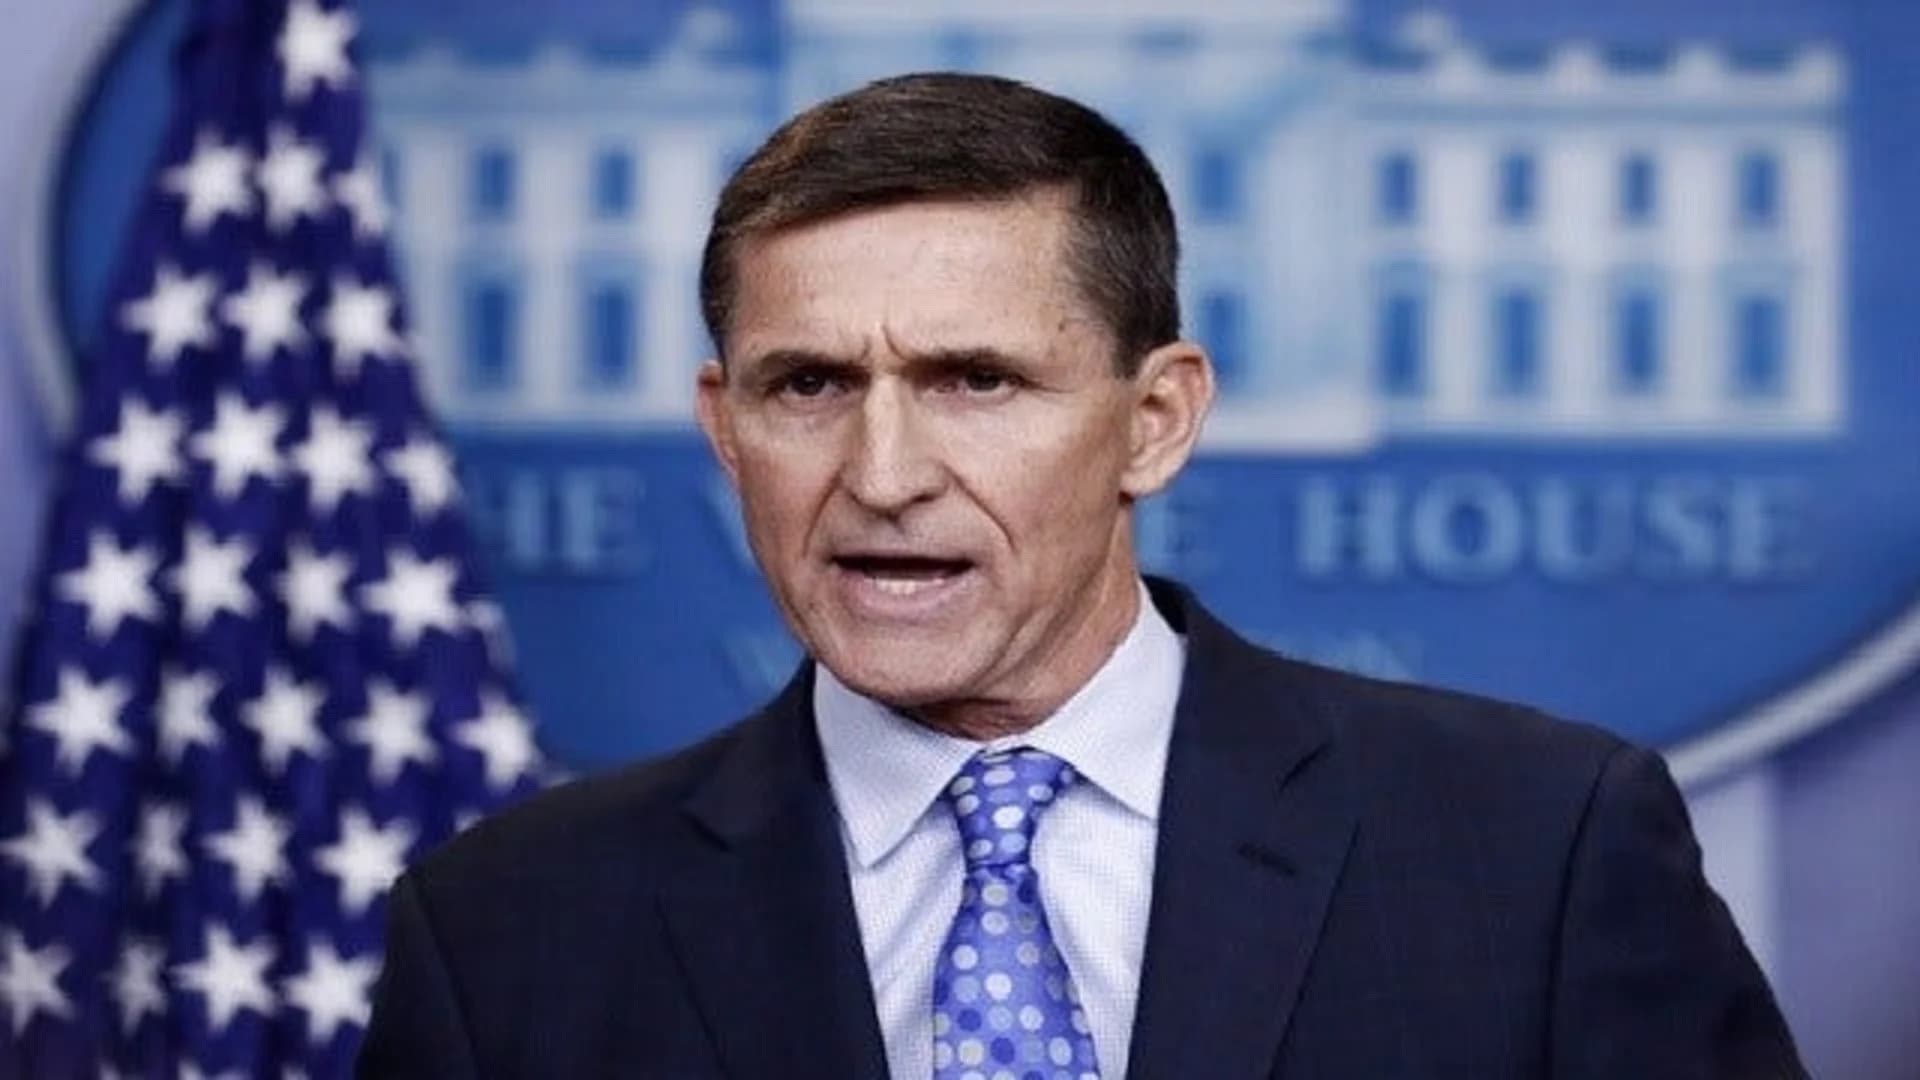 Flynn pleads guilty, is cooperating in Trump campaign probe